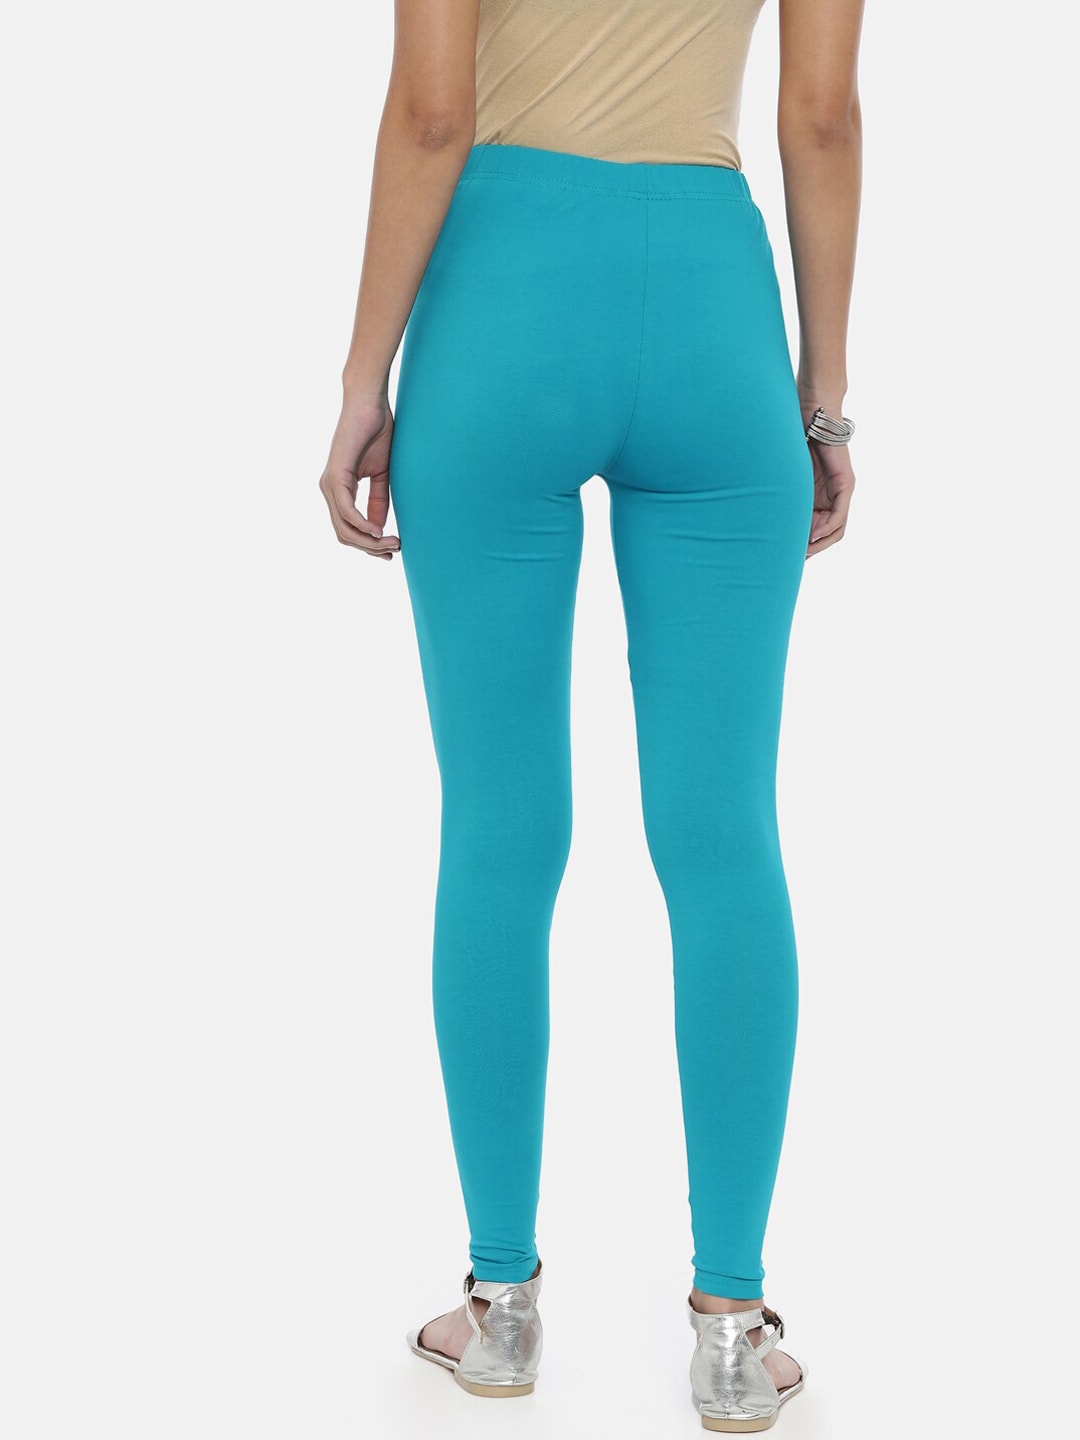 Buy Stylish Turquoise Cotton Solid Leggings For Women Online In India At  Discounted Prices